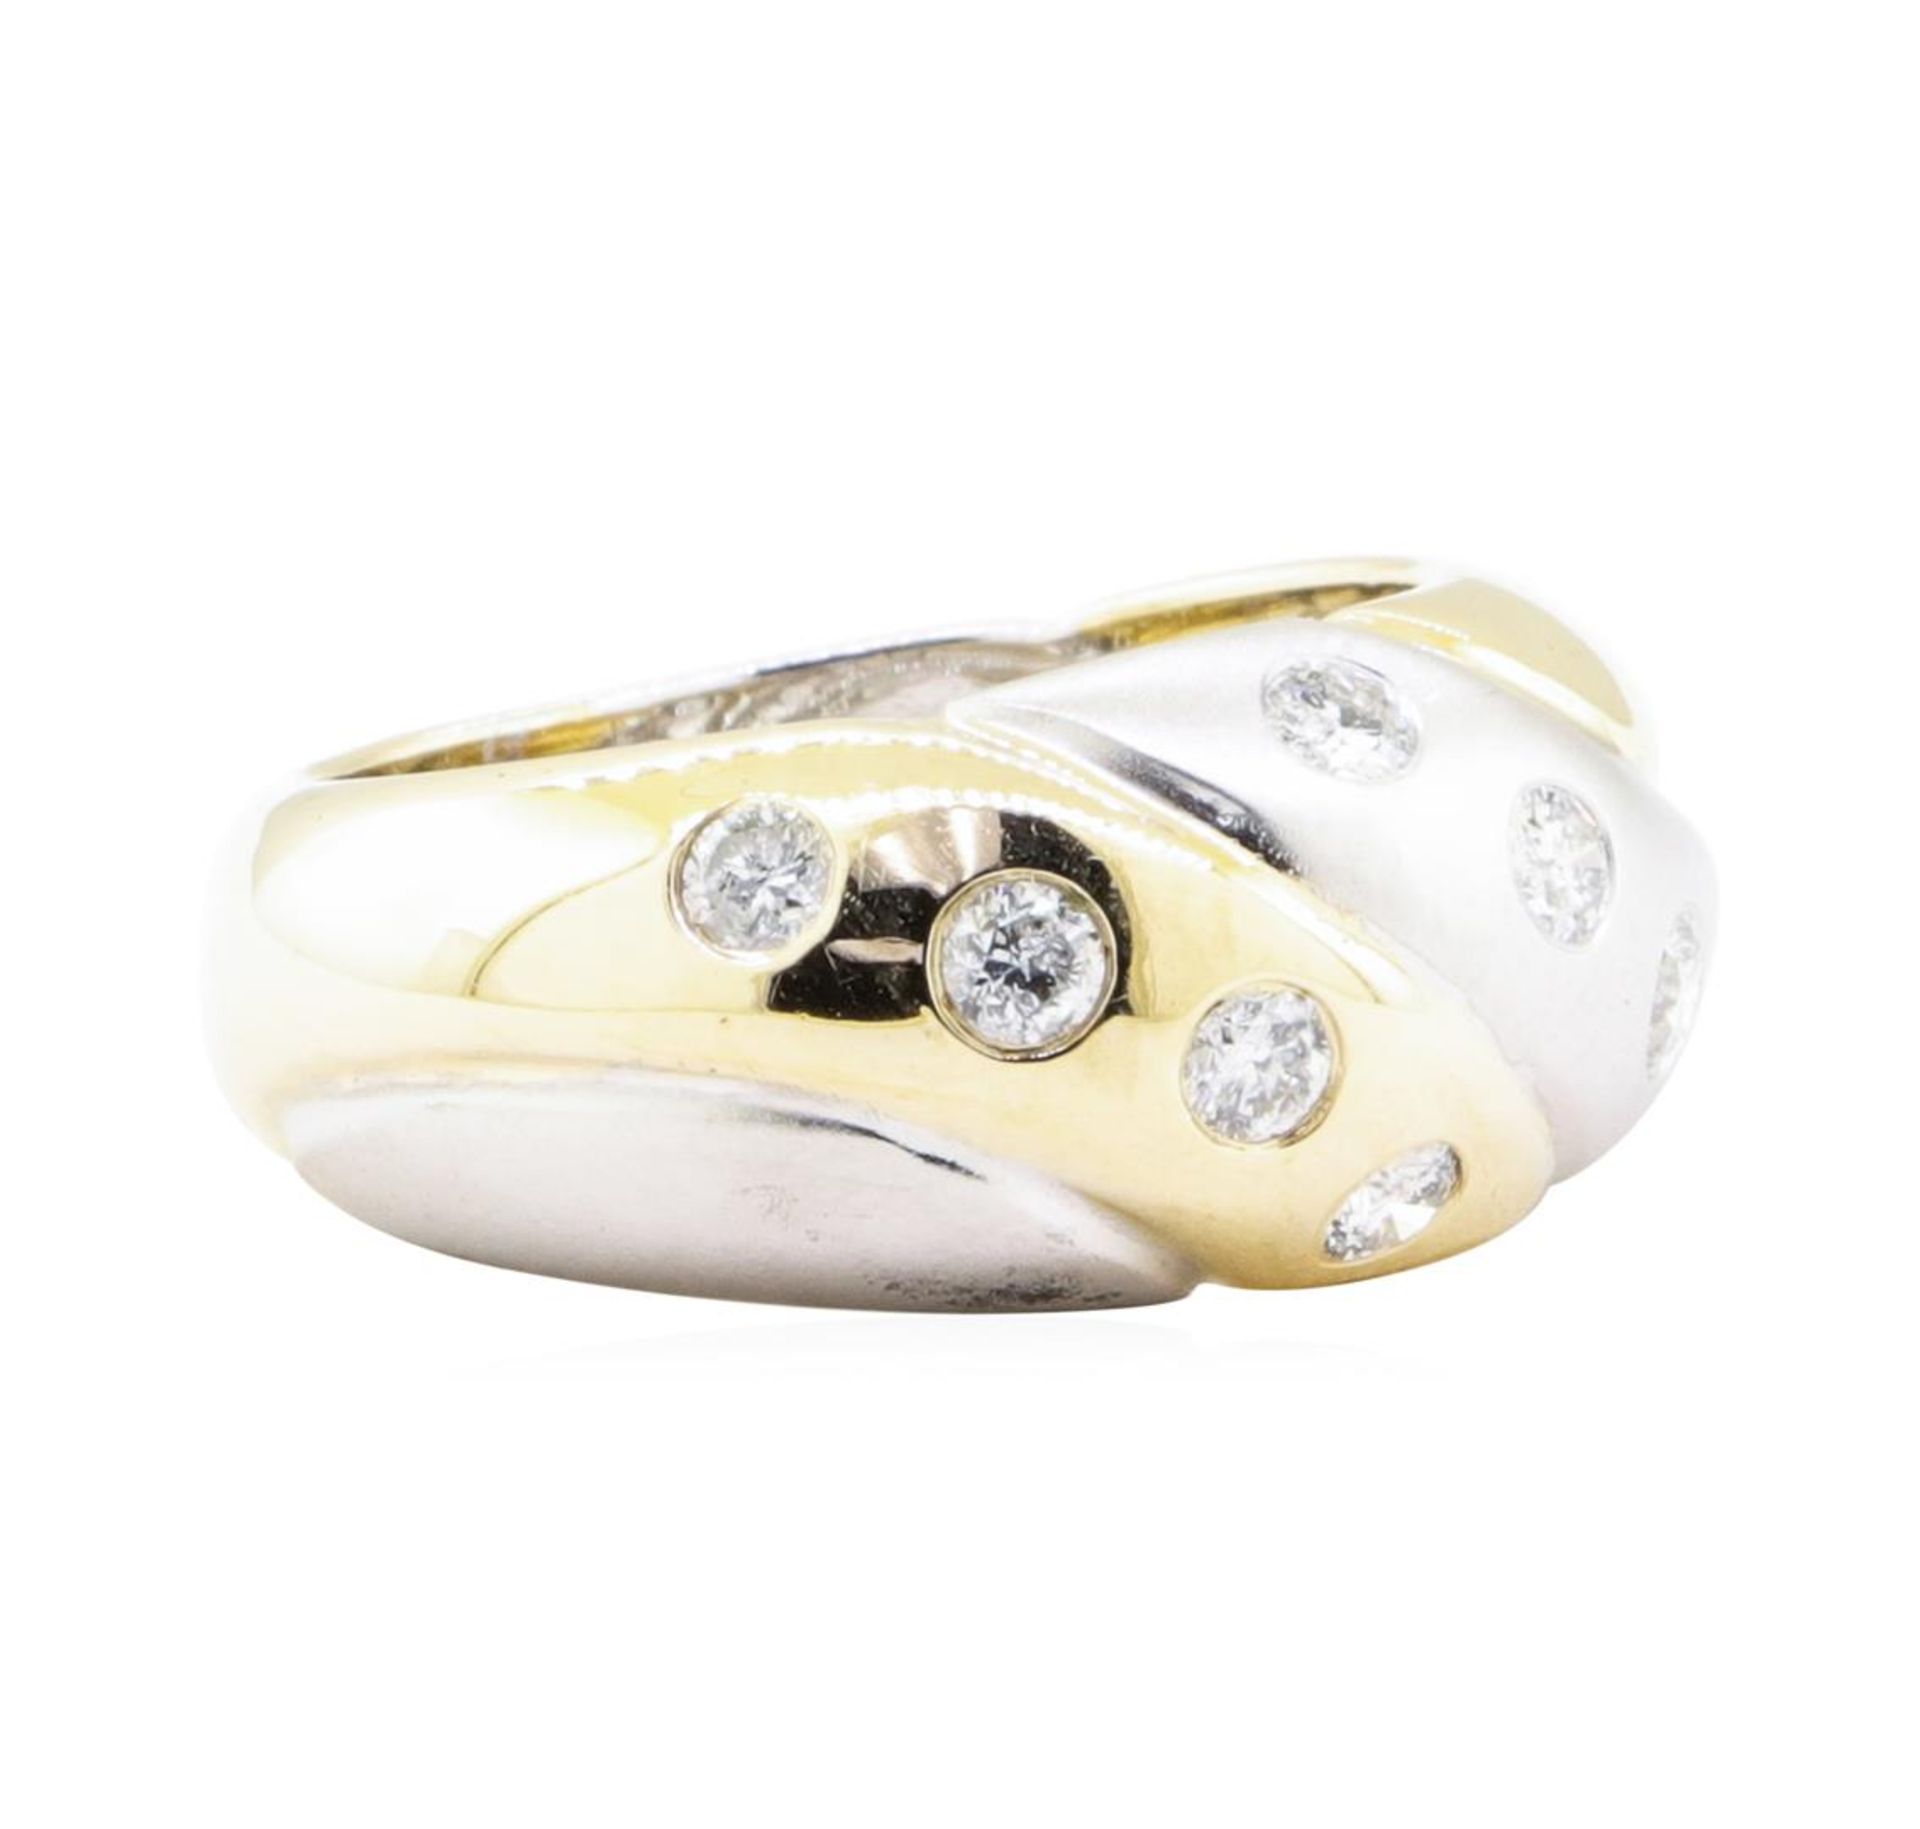 0.50 ctw Diamond Ring - 14KT Yellow And White Gold